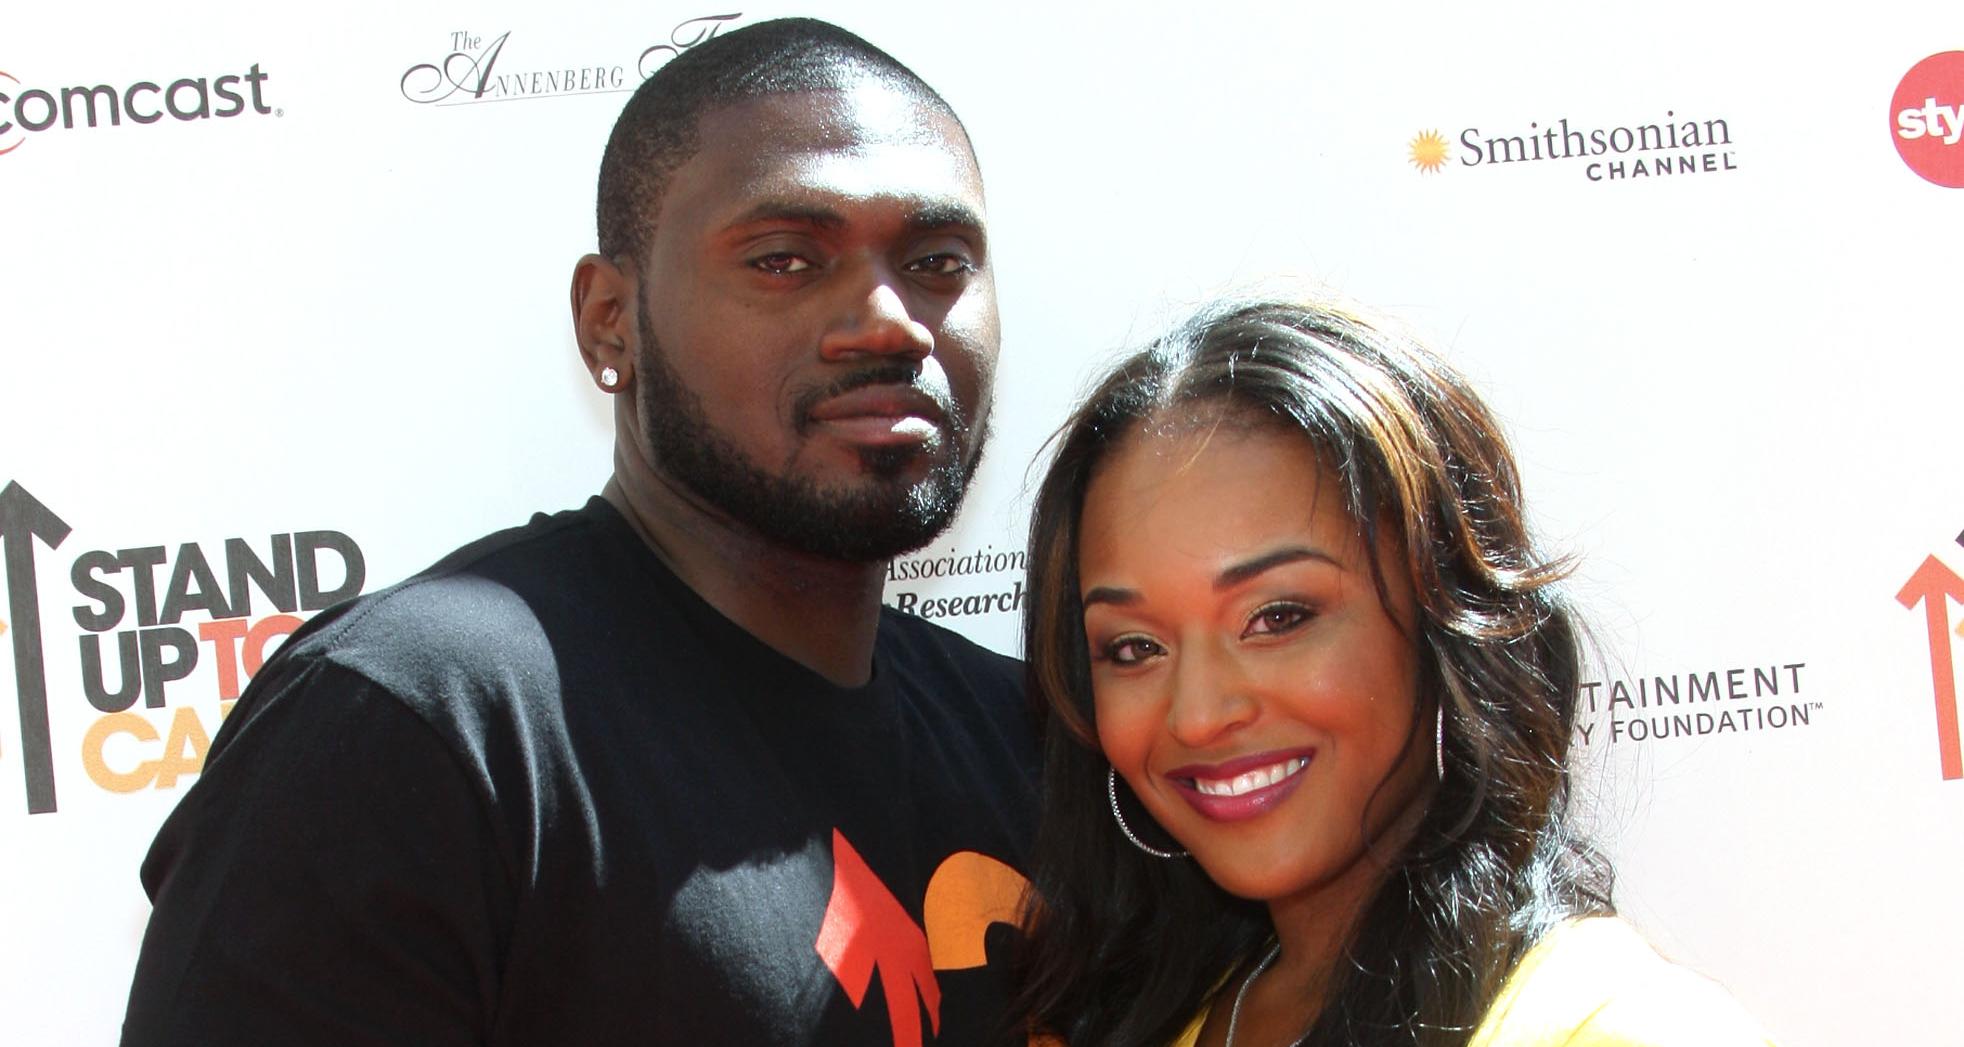 NBA player Jason Maxiell (L) and Brandi Maxiell arrive at Stand Up To Cancer held at Sony Pictures Studios